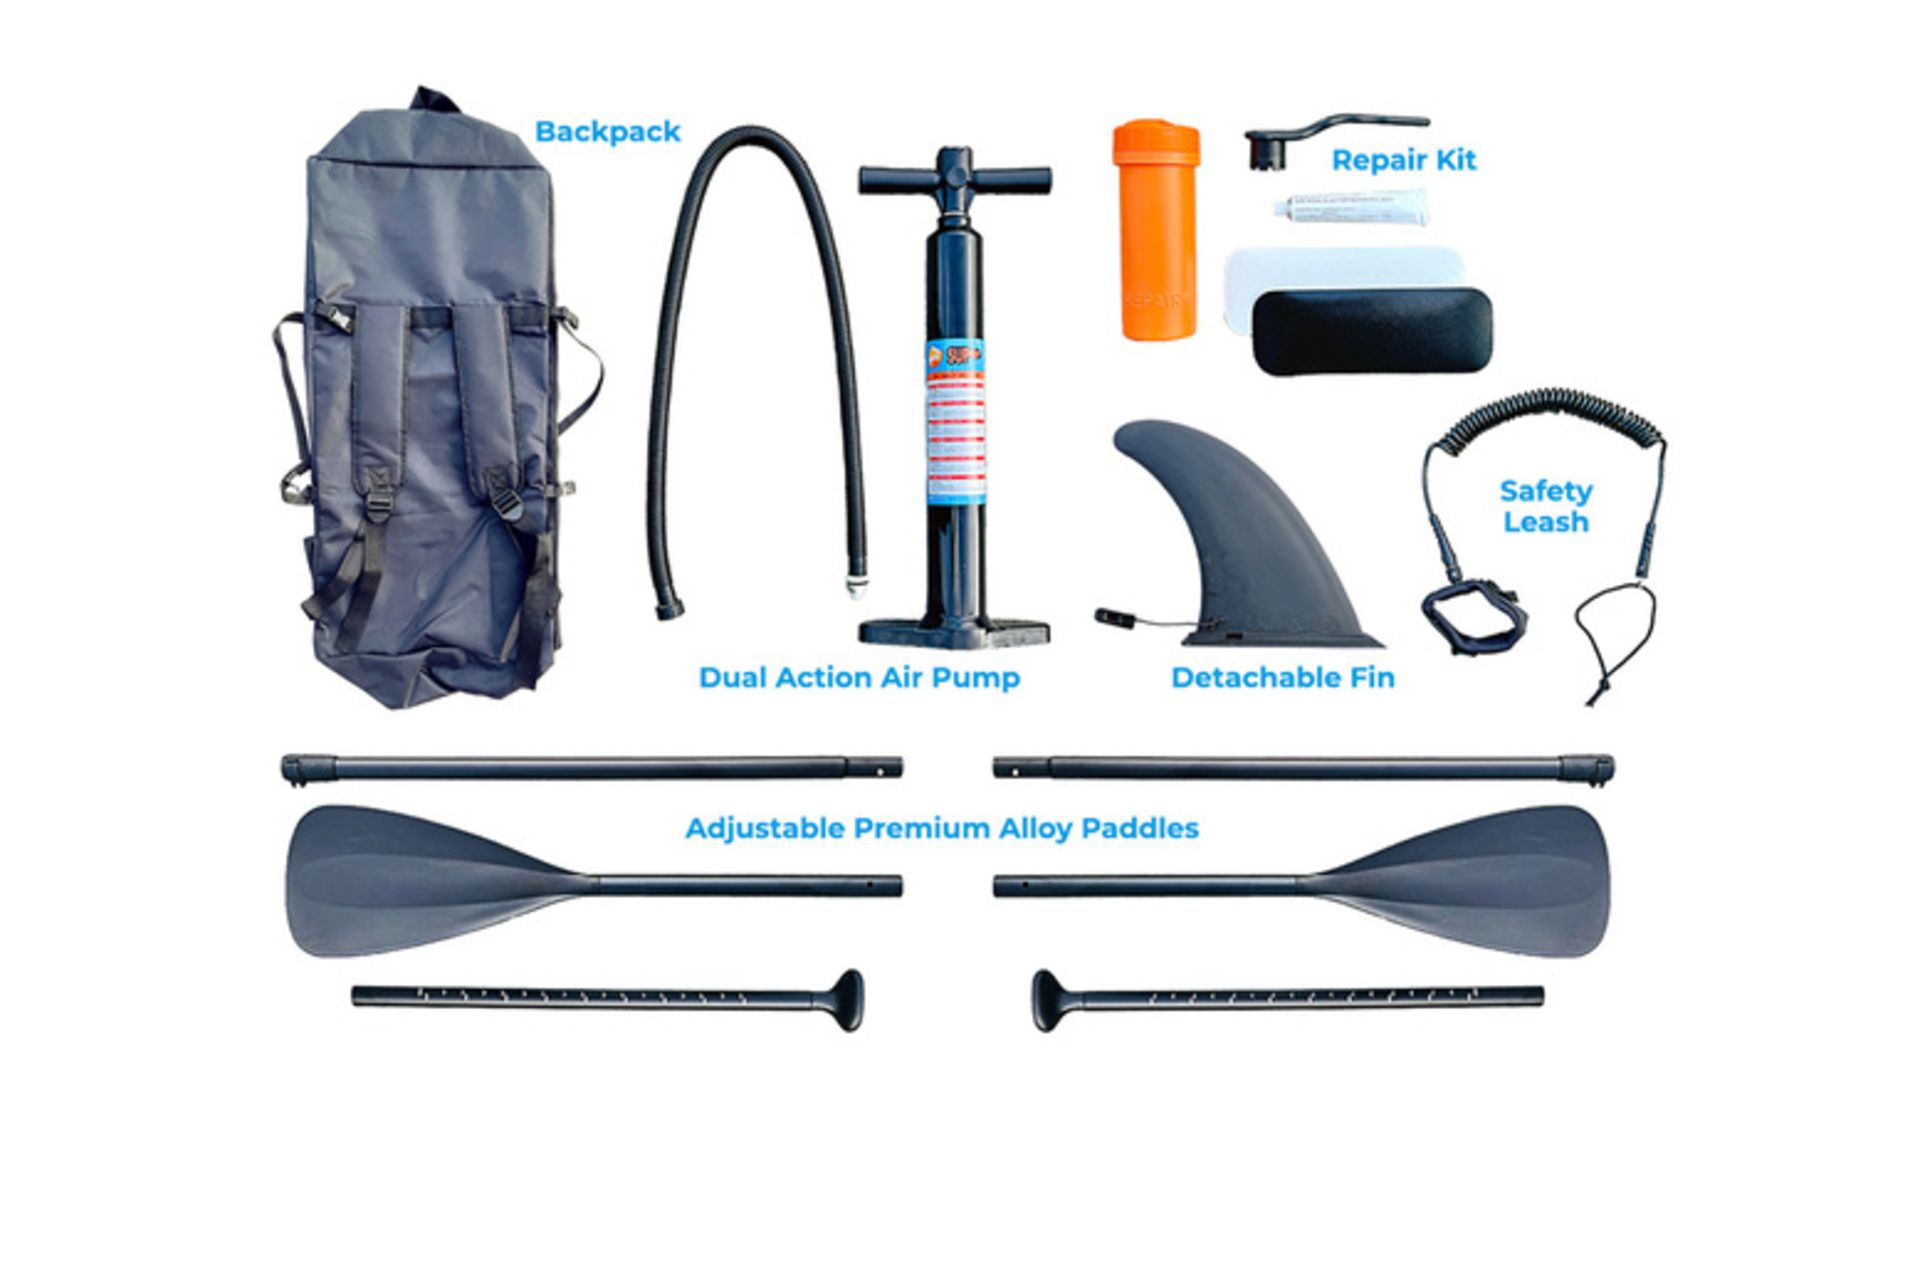 FREE DELIVERY - JOB LOT 5X LARGE 2-PERSON INFLATABLE PADDLE BOARD W/ ACCESSORIES - BLUE - Image 2 of 2